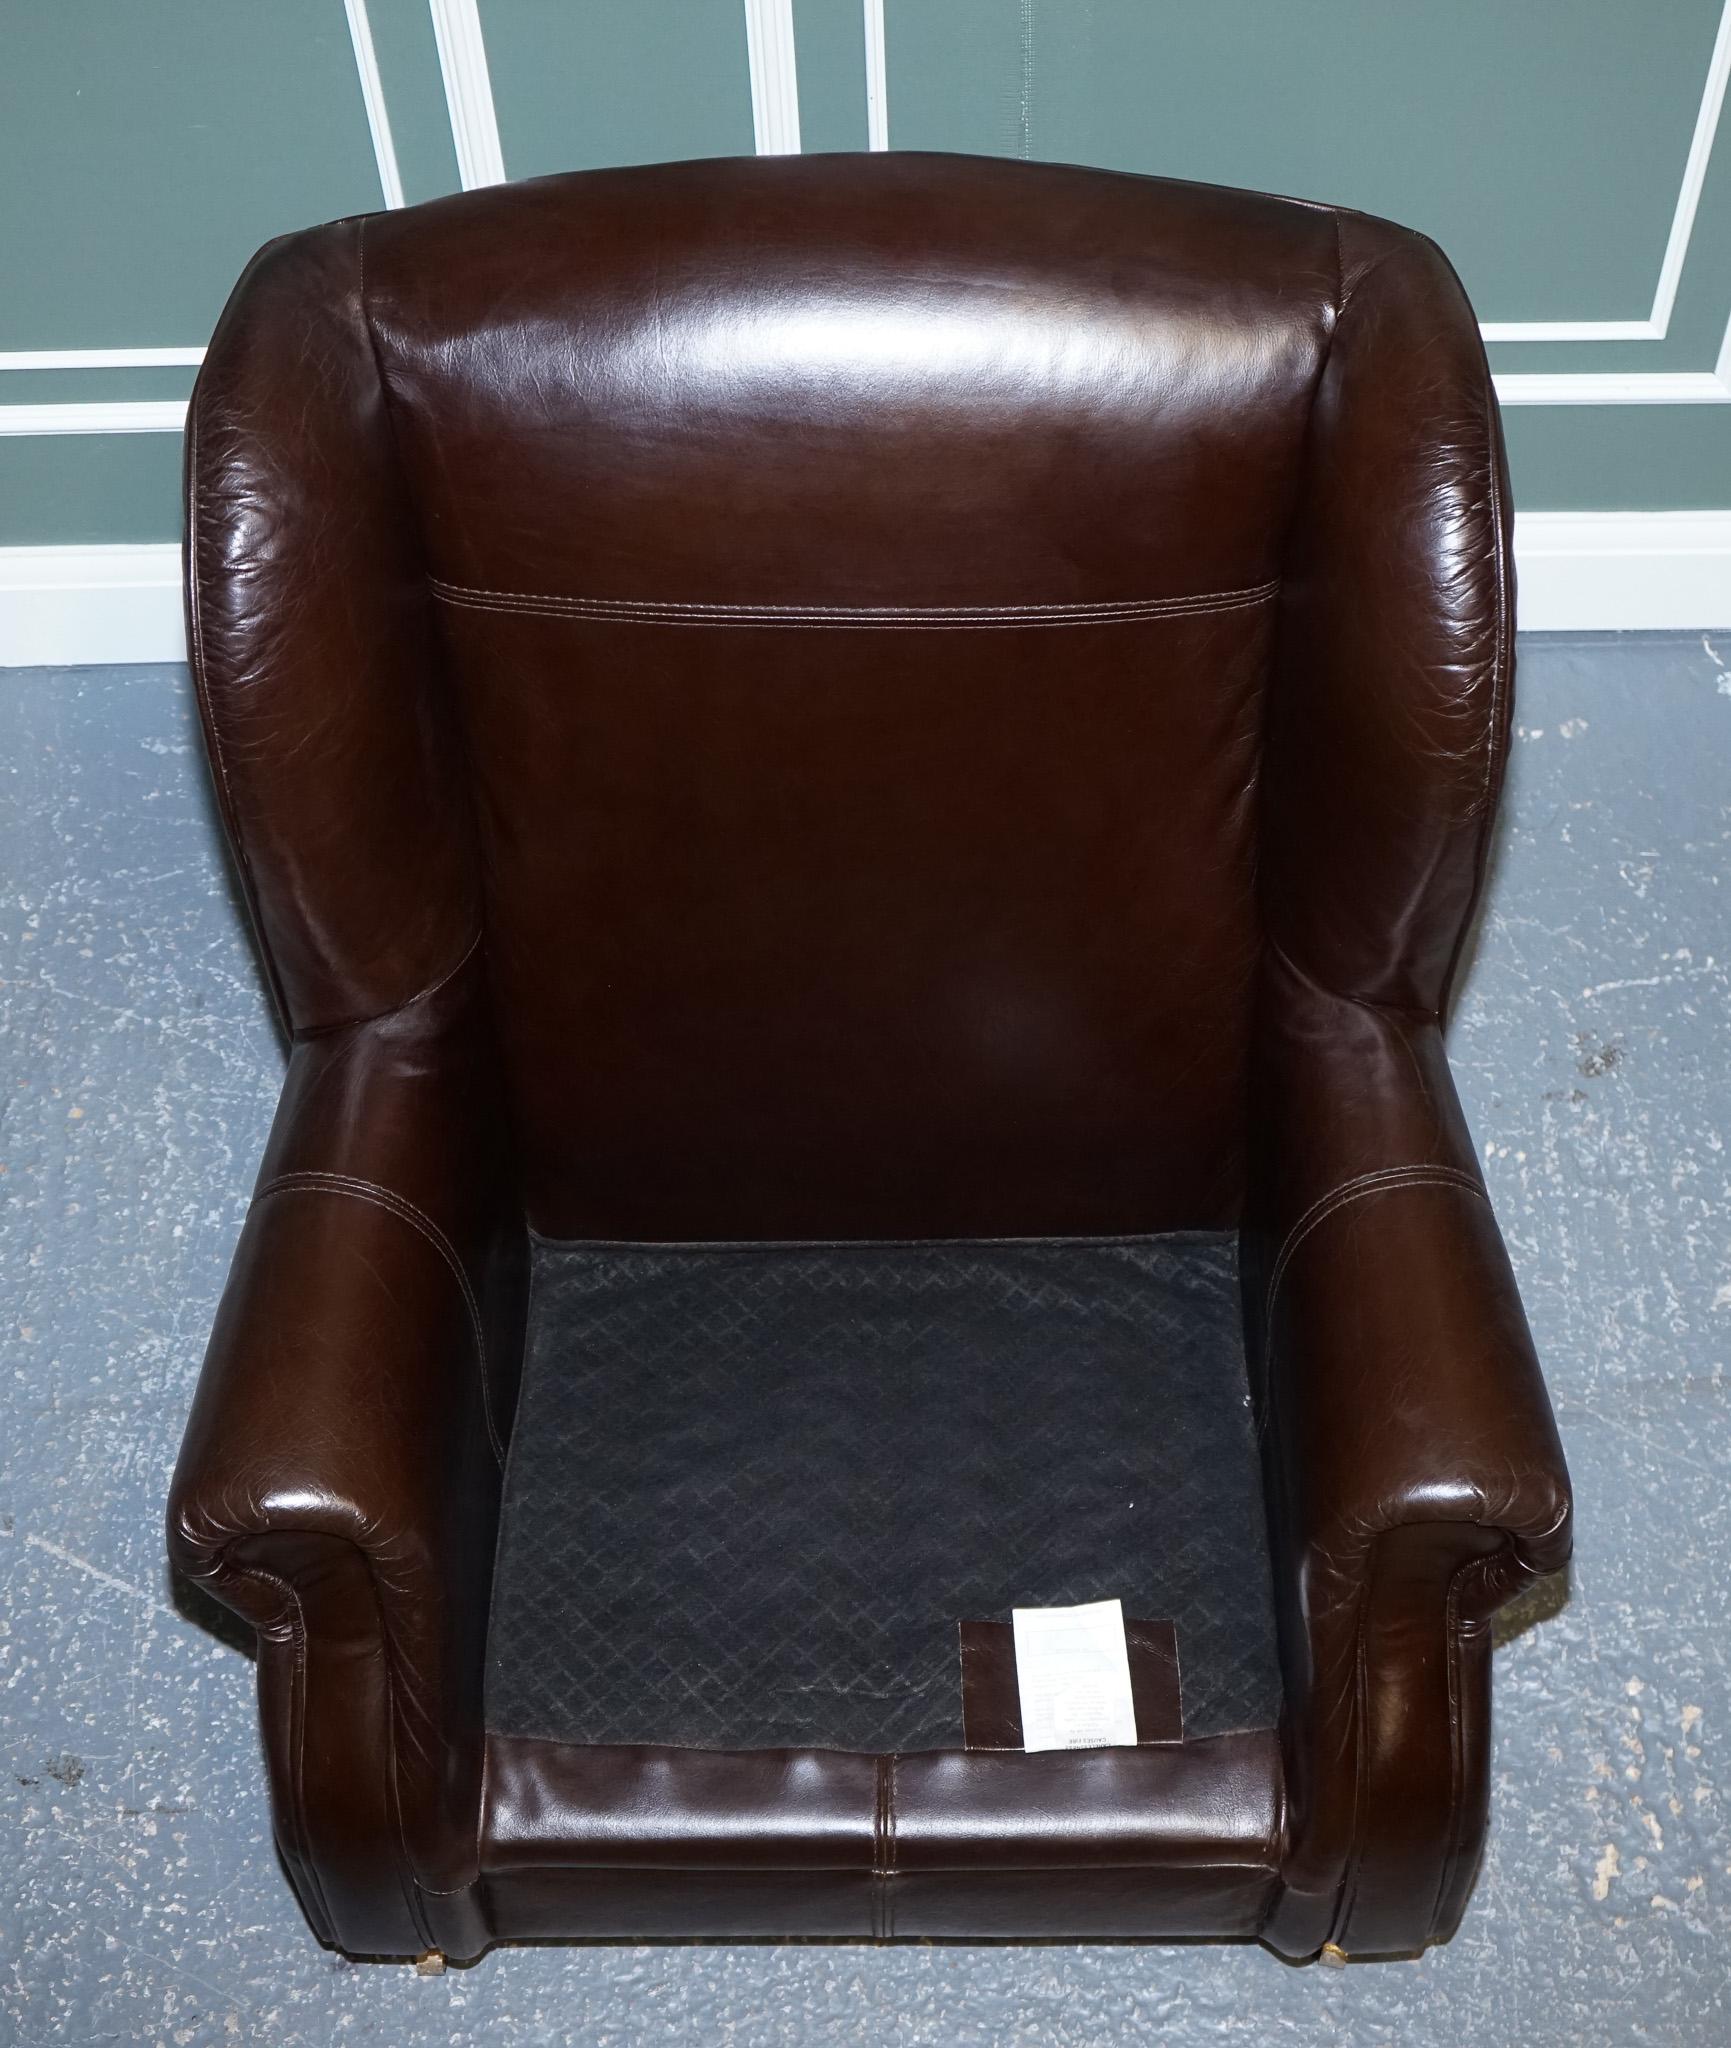 ViNTAGE PAIR OF CHOCOLATE BROWN LEATHER WINGBACK CHAIRS For Sale 6